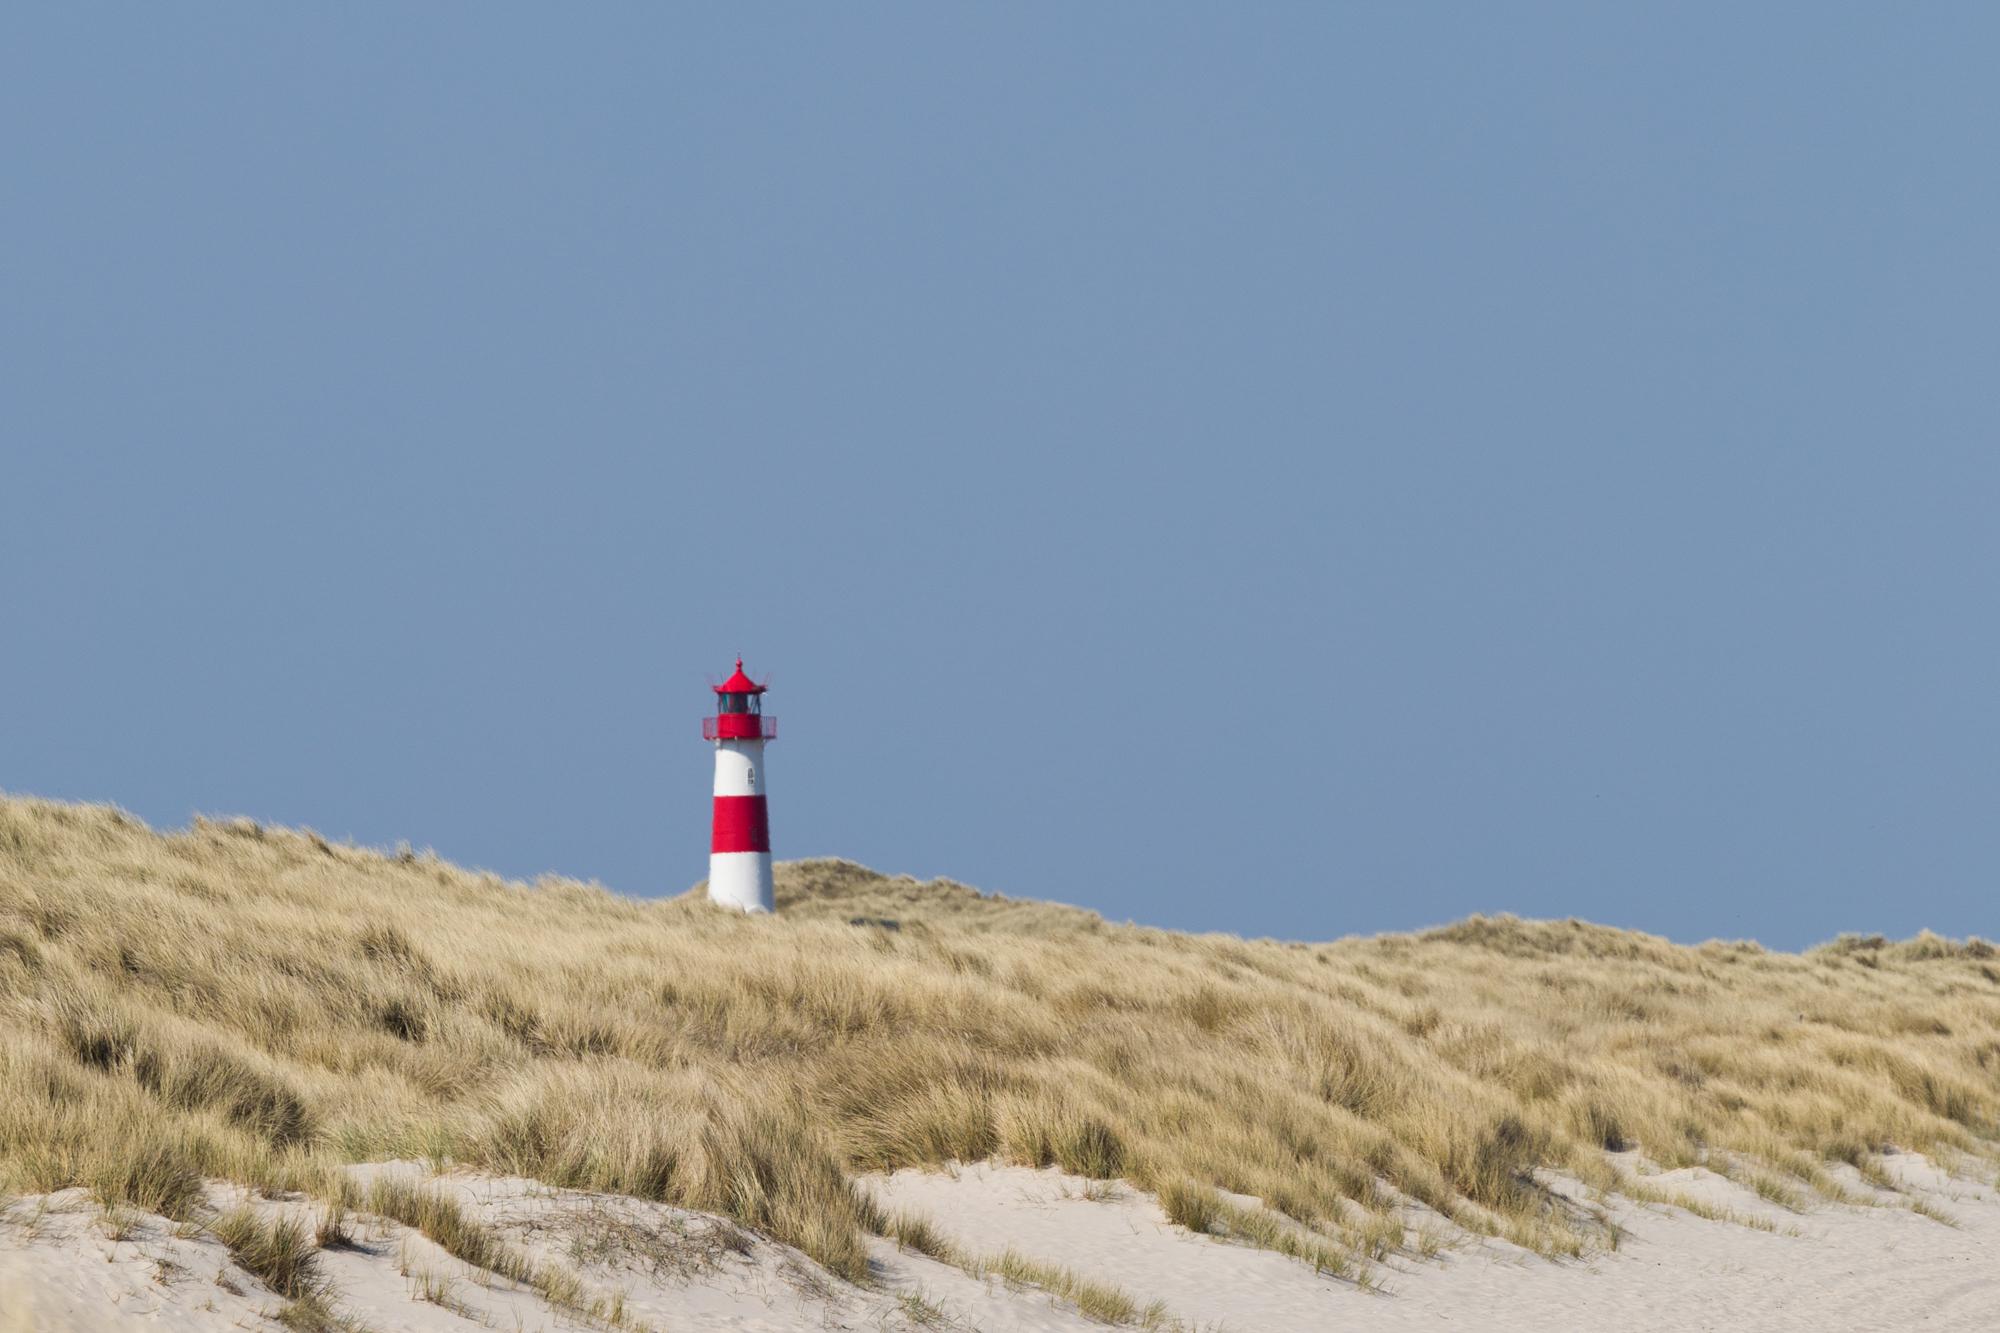 The lighthouse stands out from the beach grass with its bright red and white colors. On a clear day, the blue sky provides contrast for the lighthouse.